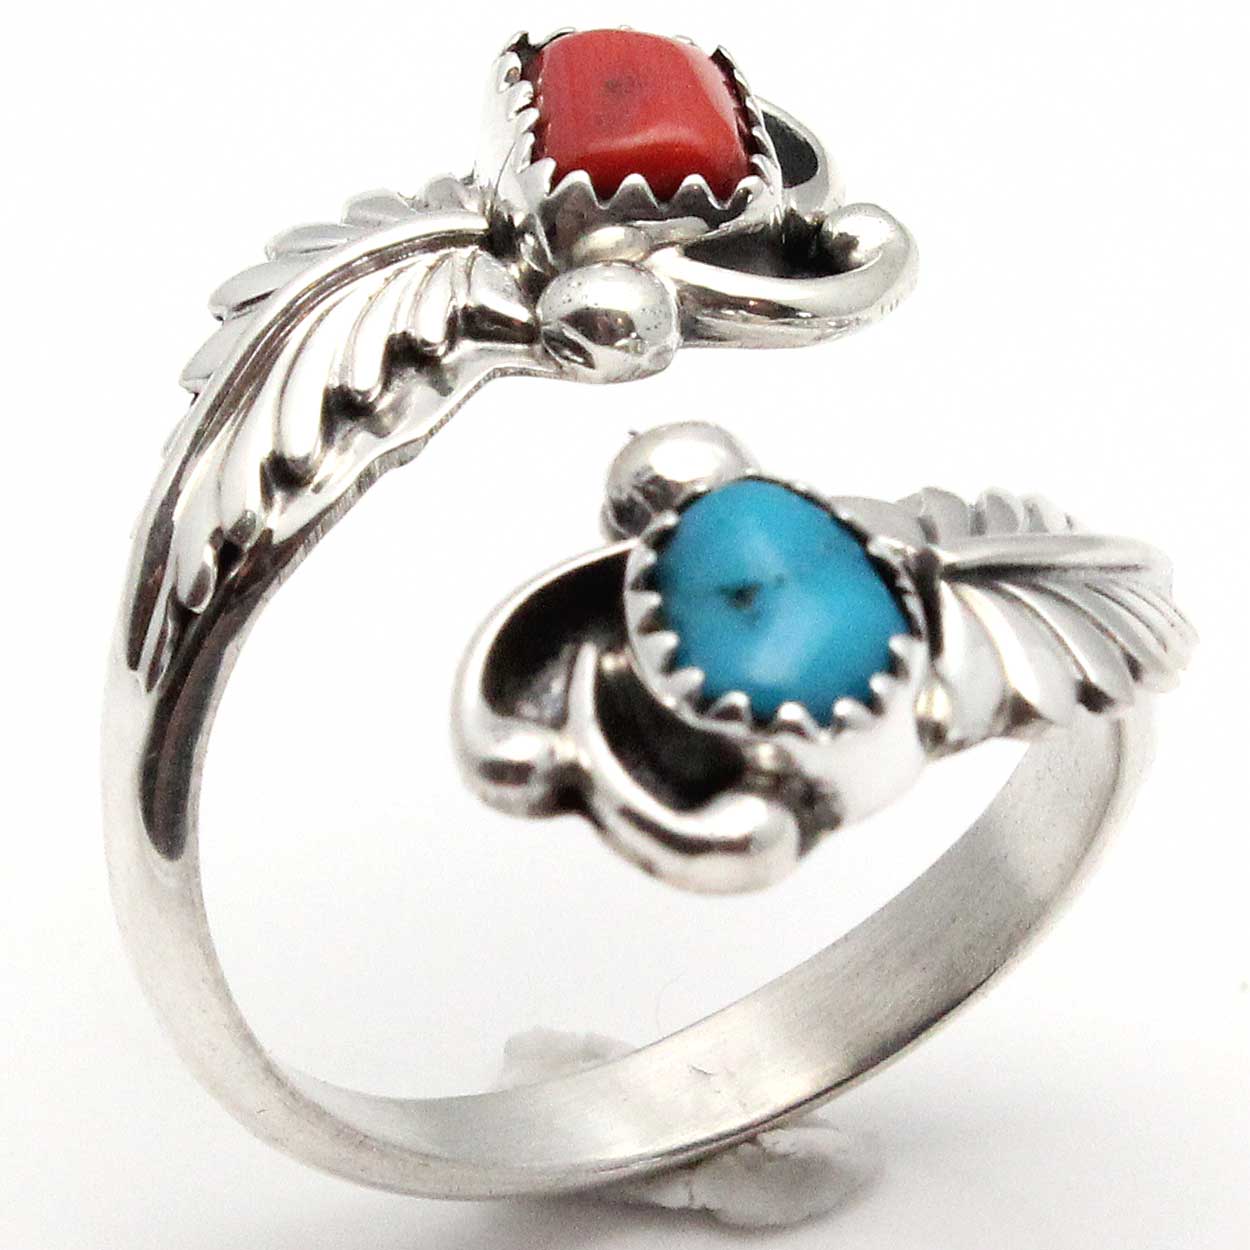 Adjustable Ring Featuring Turquoise & Coral